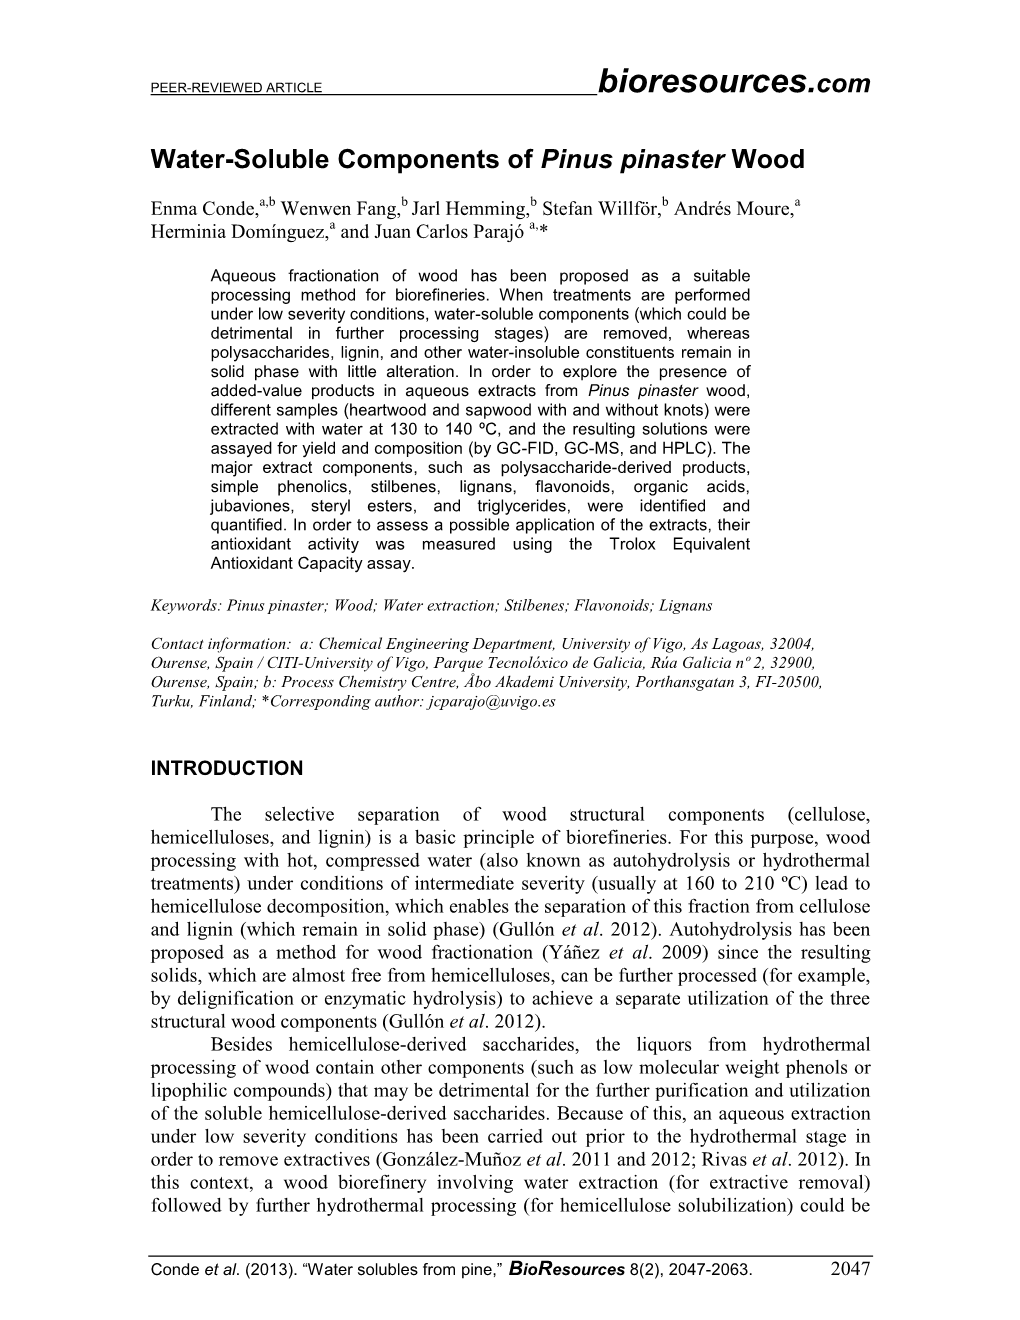 Water-Soluble Components of Pinus Pinaster Wood